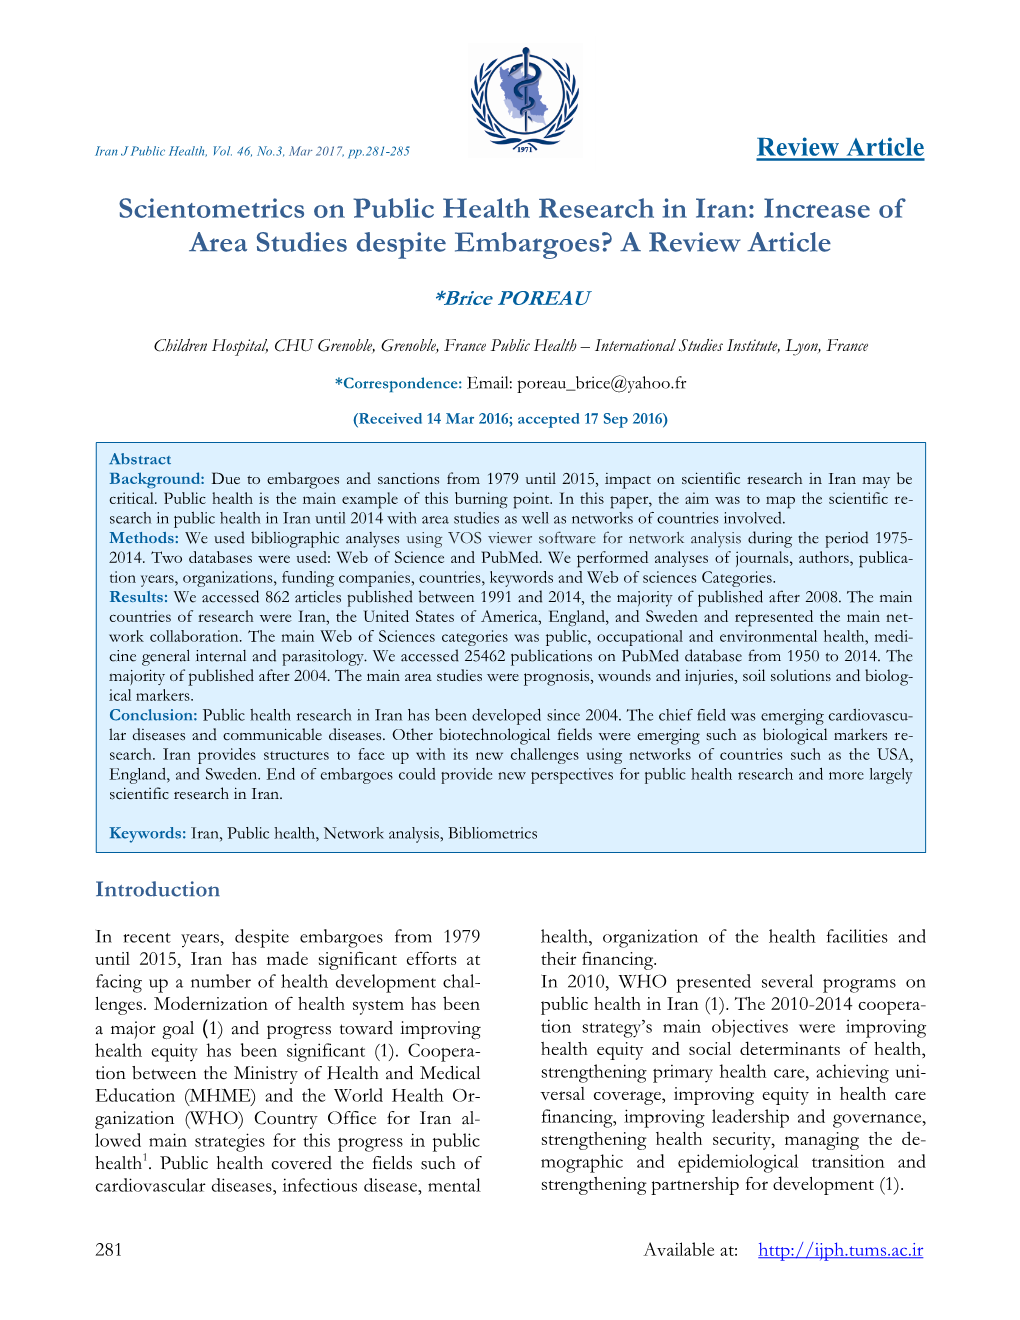 Scientometrics on Public Health Research in Iran: Increase of Area Studies Despite Embargoes? a Review Article